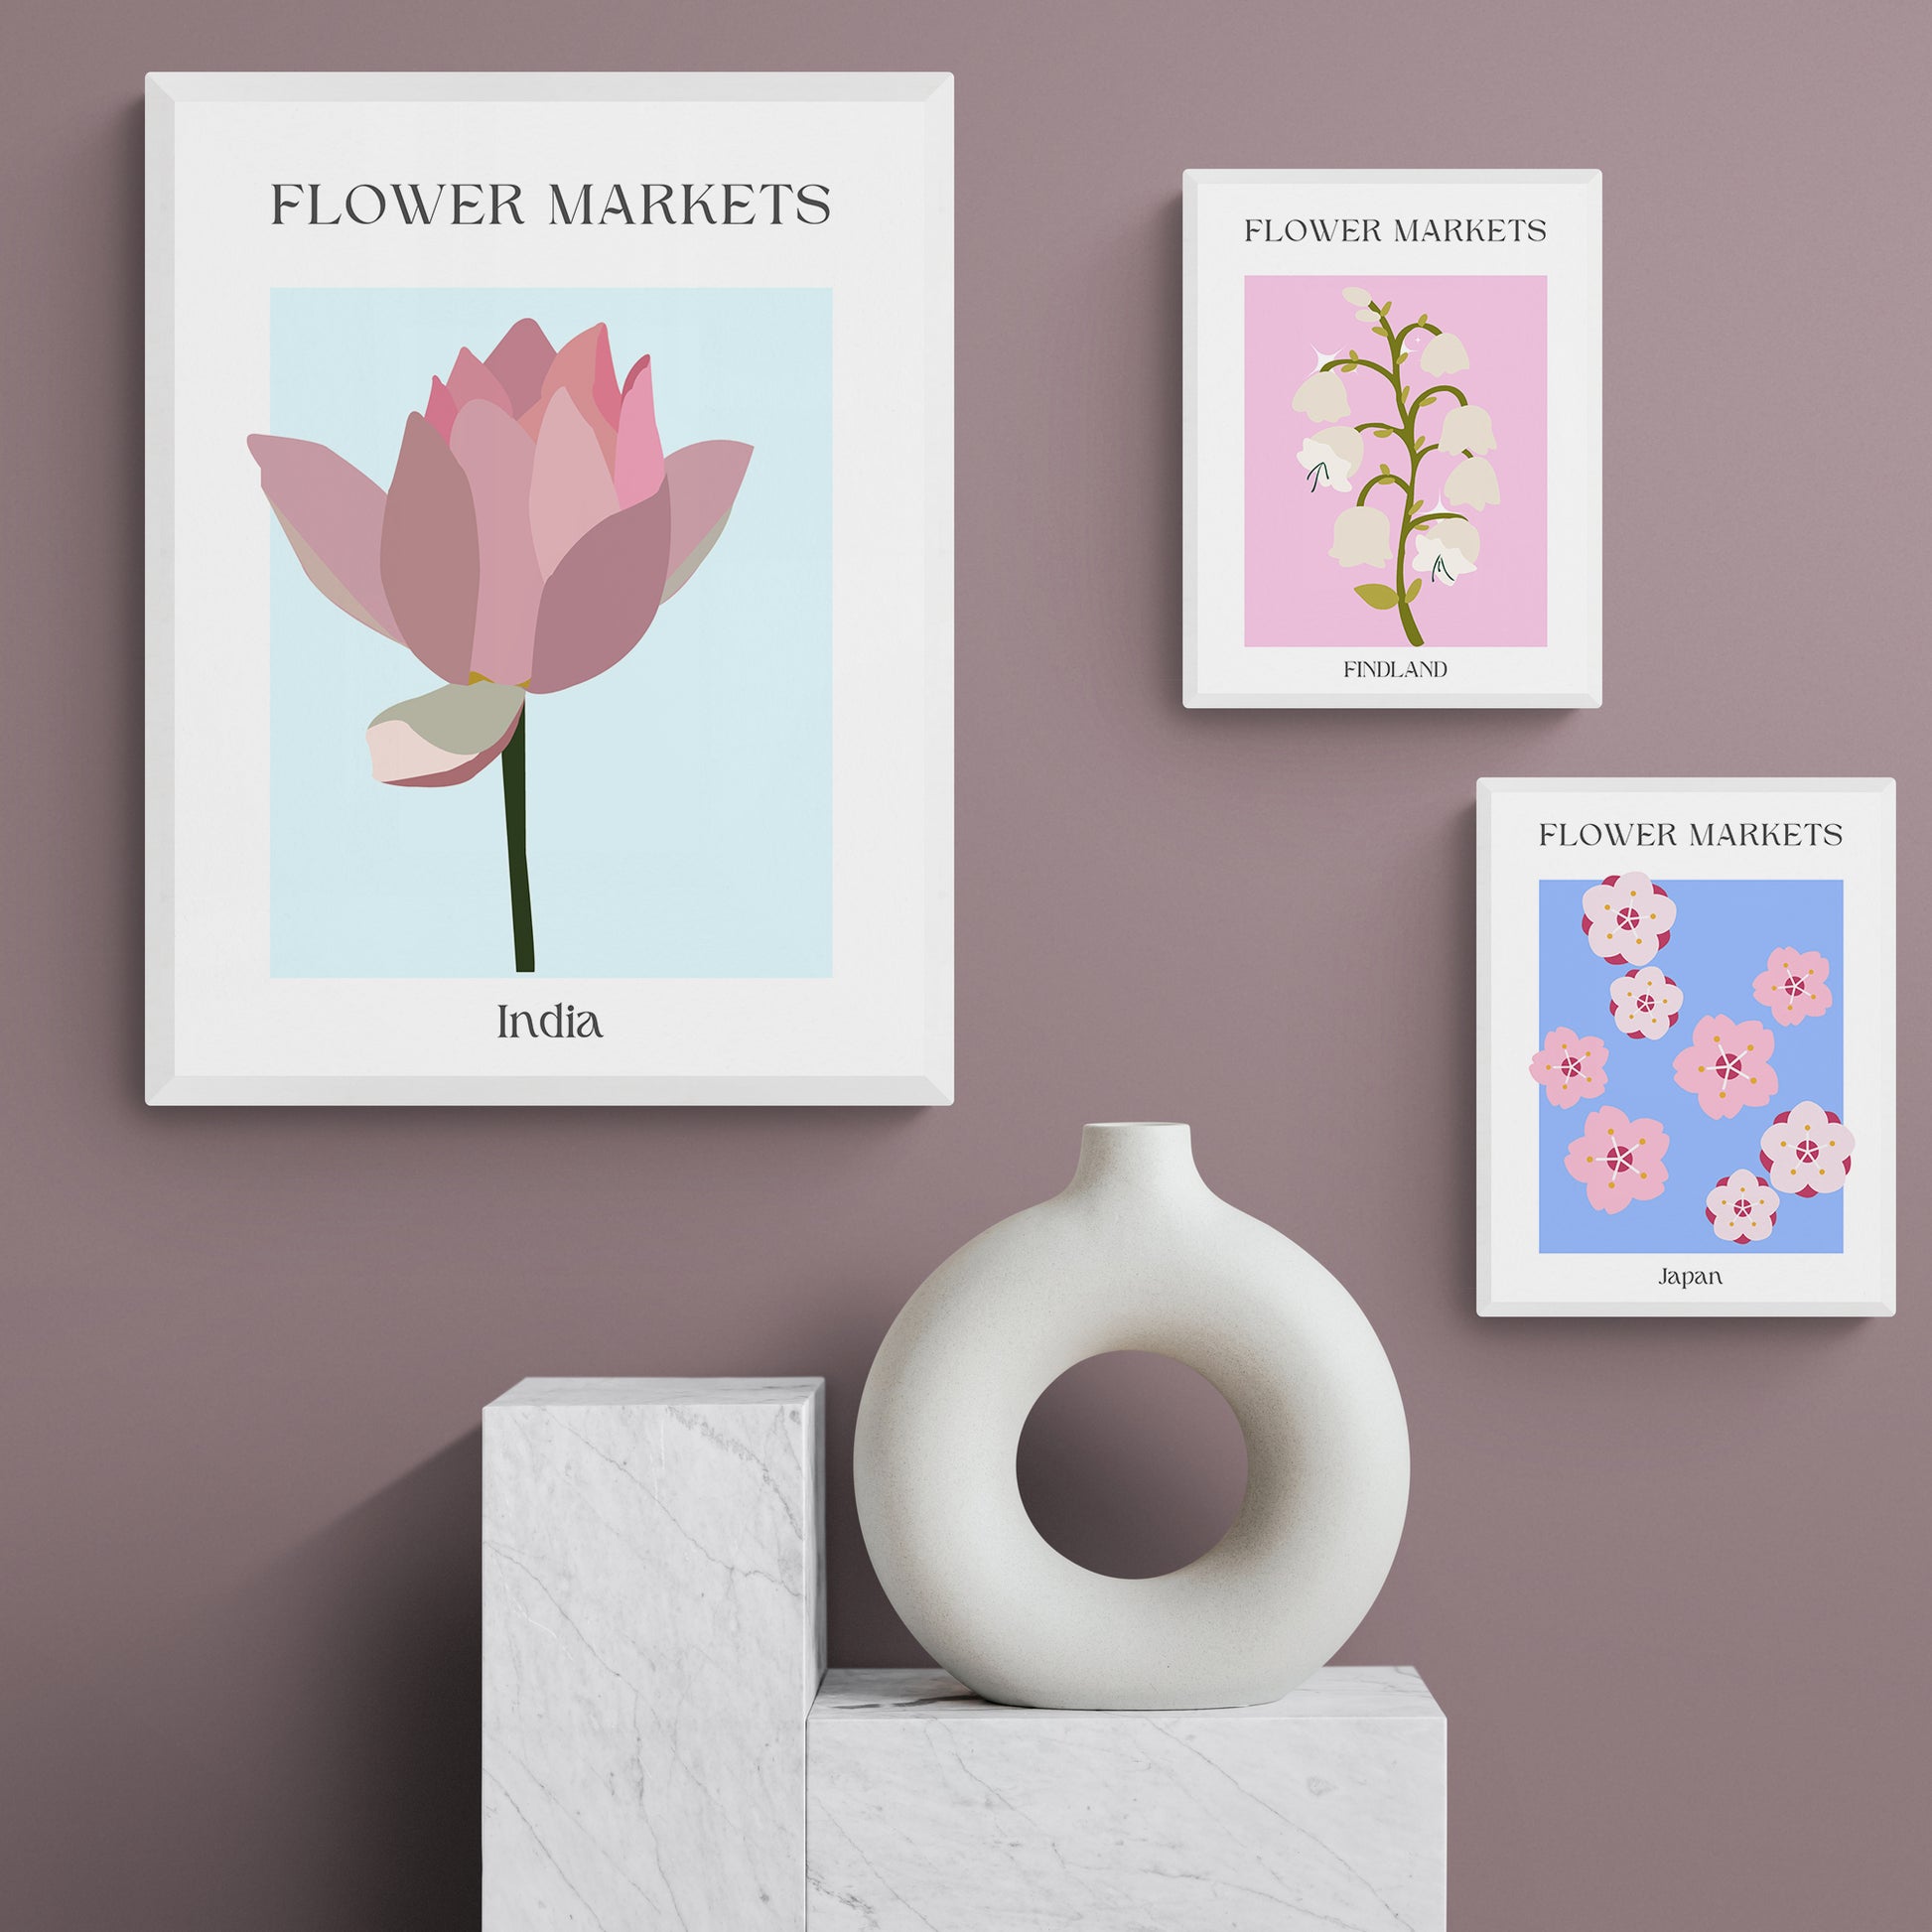 This Scotland Flowers Market Print combines beautiful, gallery-quality wall art prints with a Danish pastel room decor. A poster from shapes, formes and art that is inspired by the work of Matisse, this colorful, floral drawing will add subtle style to any space. Perfect for a unique and artistic touch!